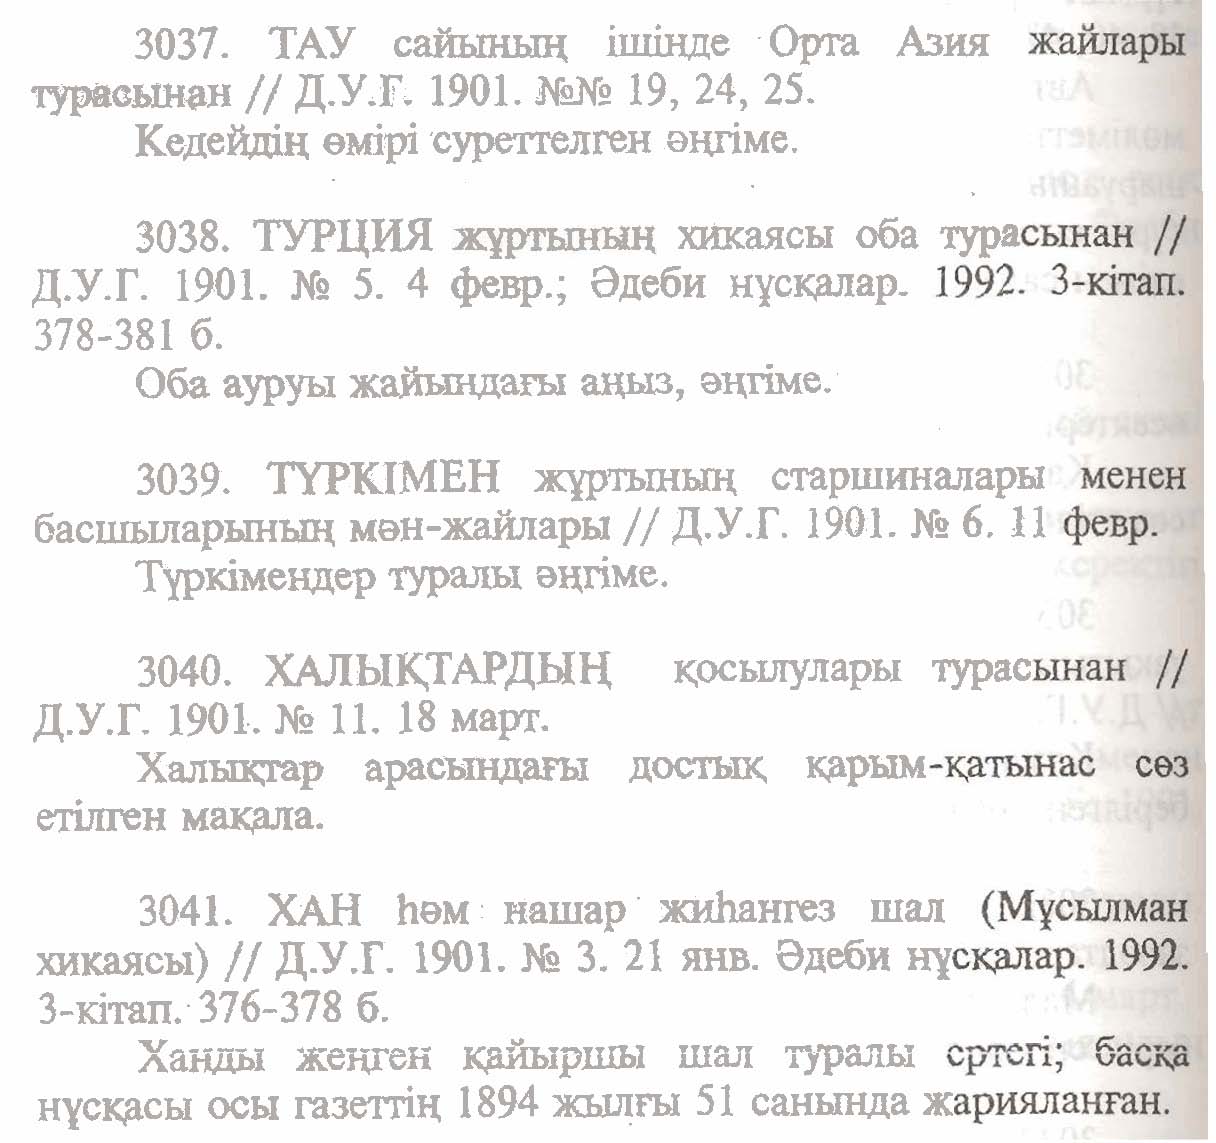 Sample entries from the DALA UALAIATYNYNG GAZETI section --note citations to 1992 reprints in the second and last entries